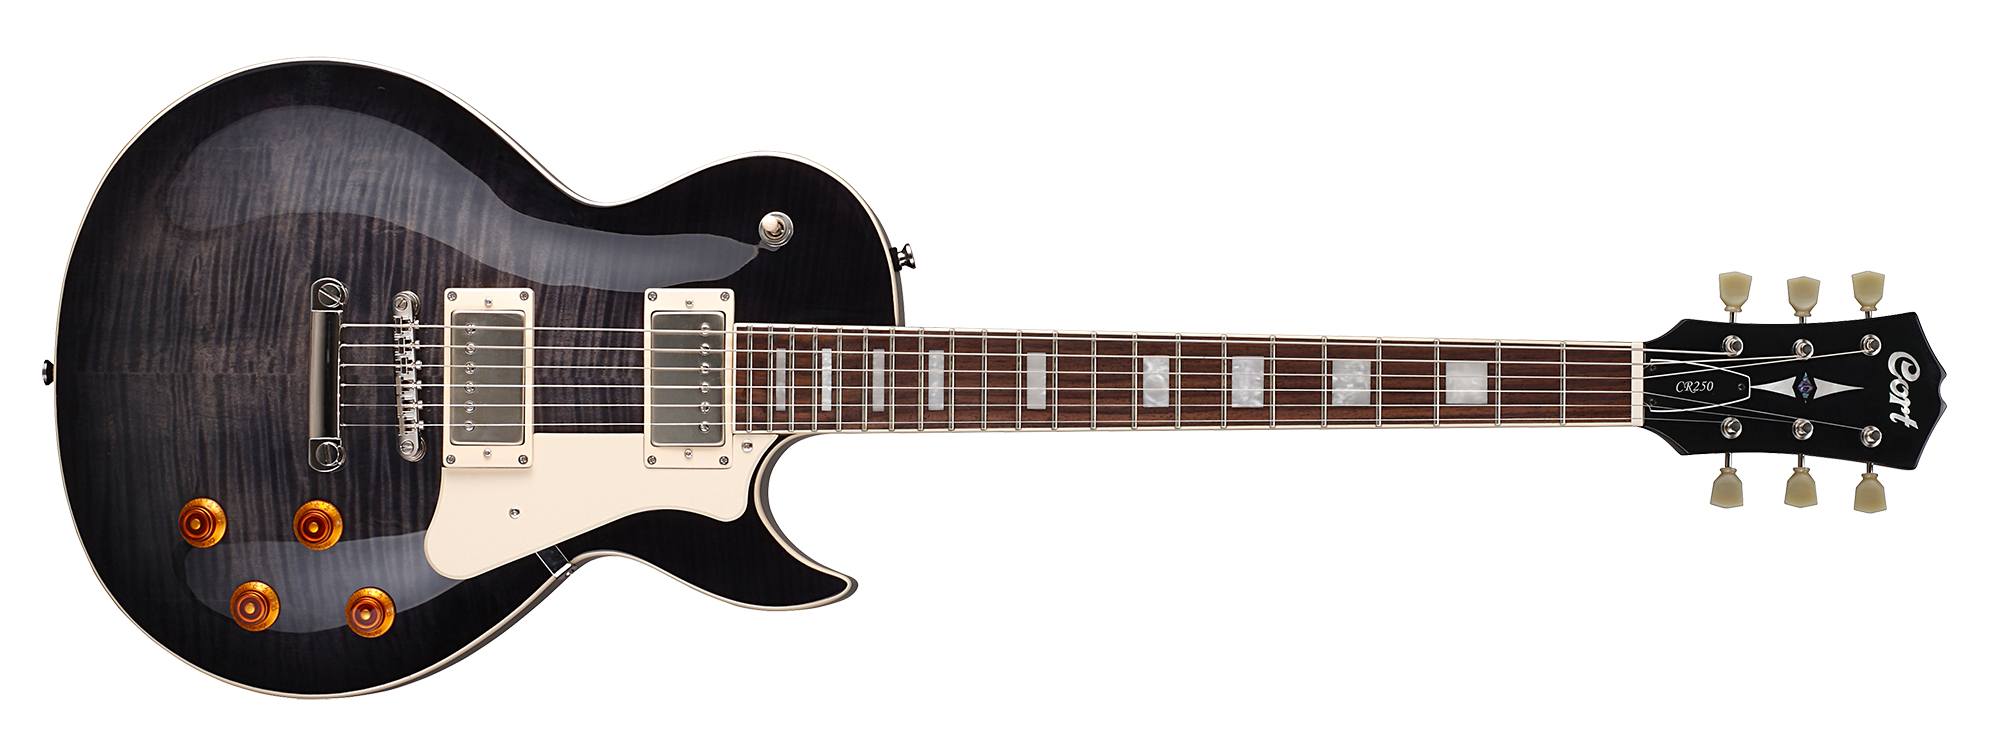 Cort CR250 Black, Electric Guitar for sale at Richards Guitars.